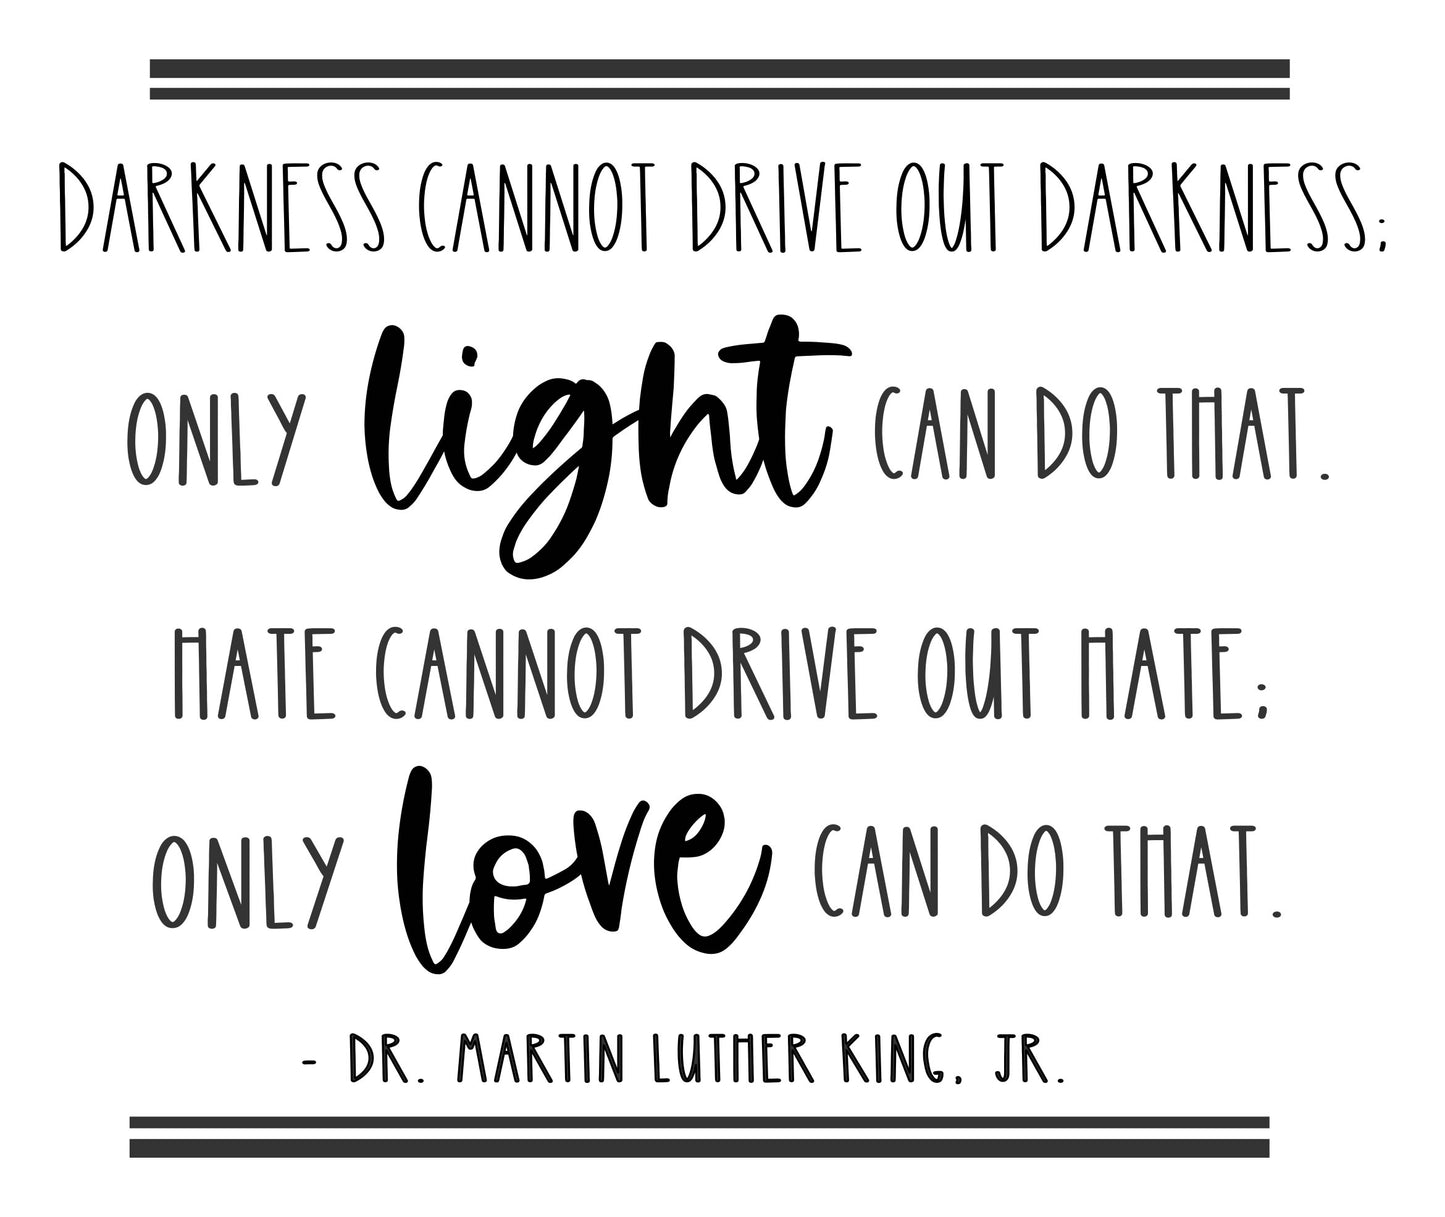 DARKNESS CANNOT DRIVE OUT DARKNESS. ONLY LIGHT CAN DO THAT. HATE CANNOT DRIVE OUT HATE. ONLY LOVE CAN DO THAT. MLK - B